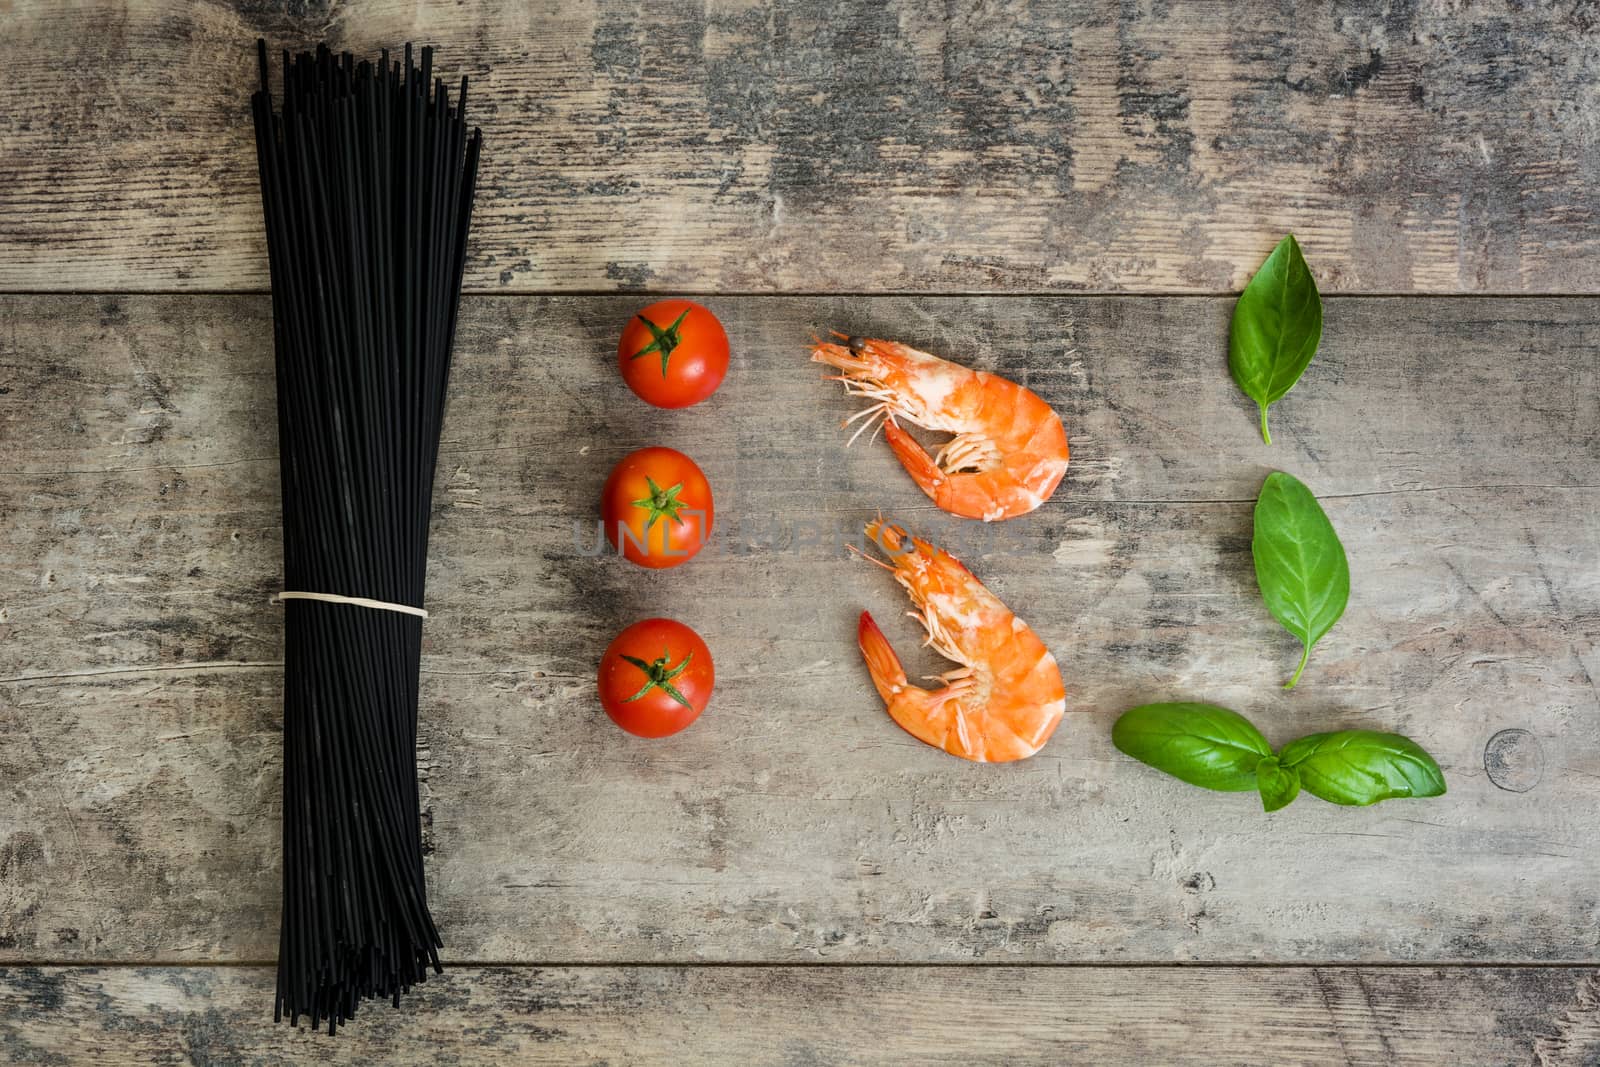 Raw black spaghetti with prawns, tomatoes and basil on wooden background by chandlervid85